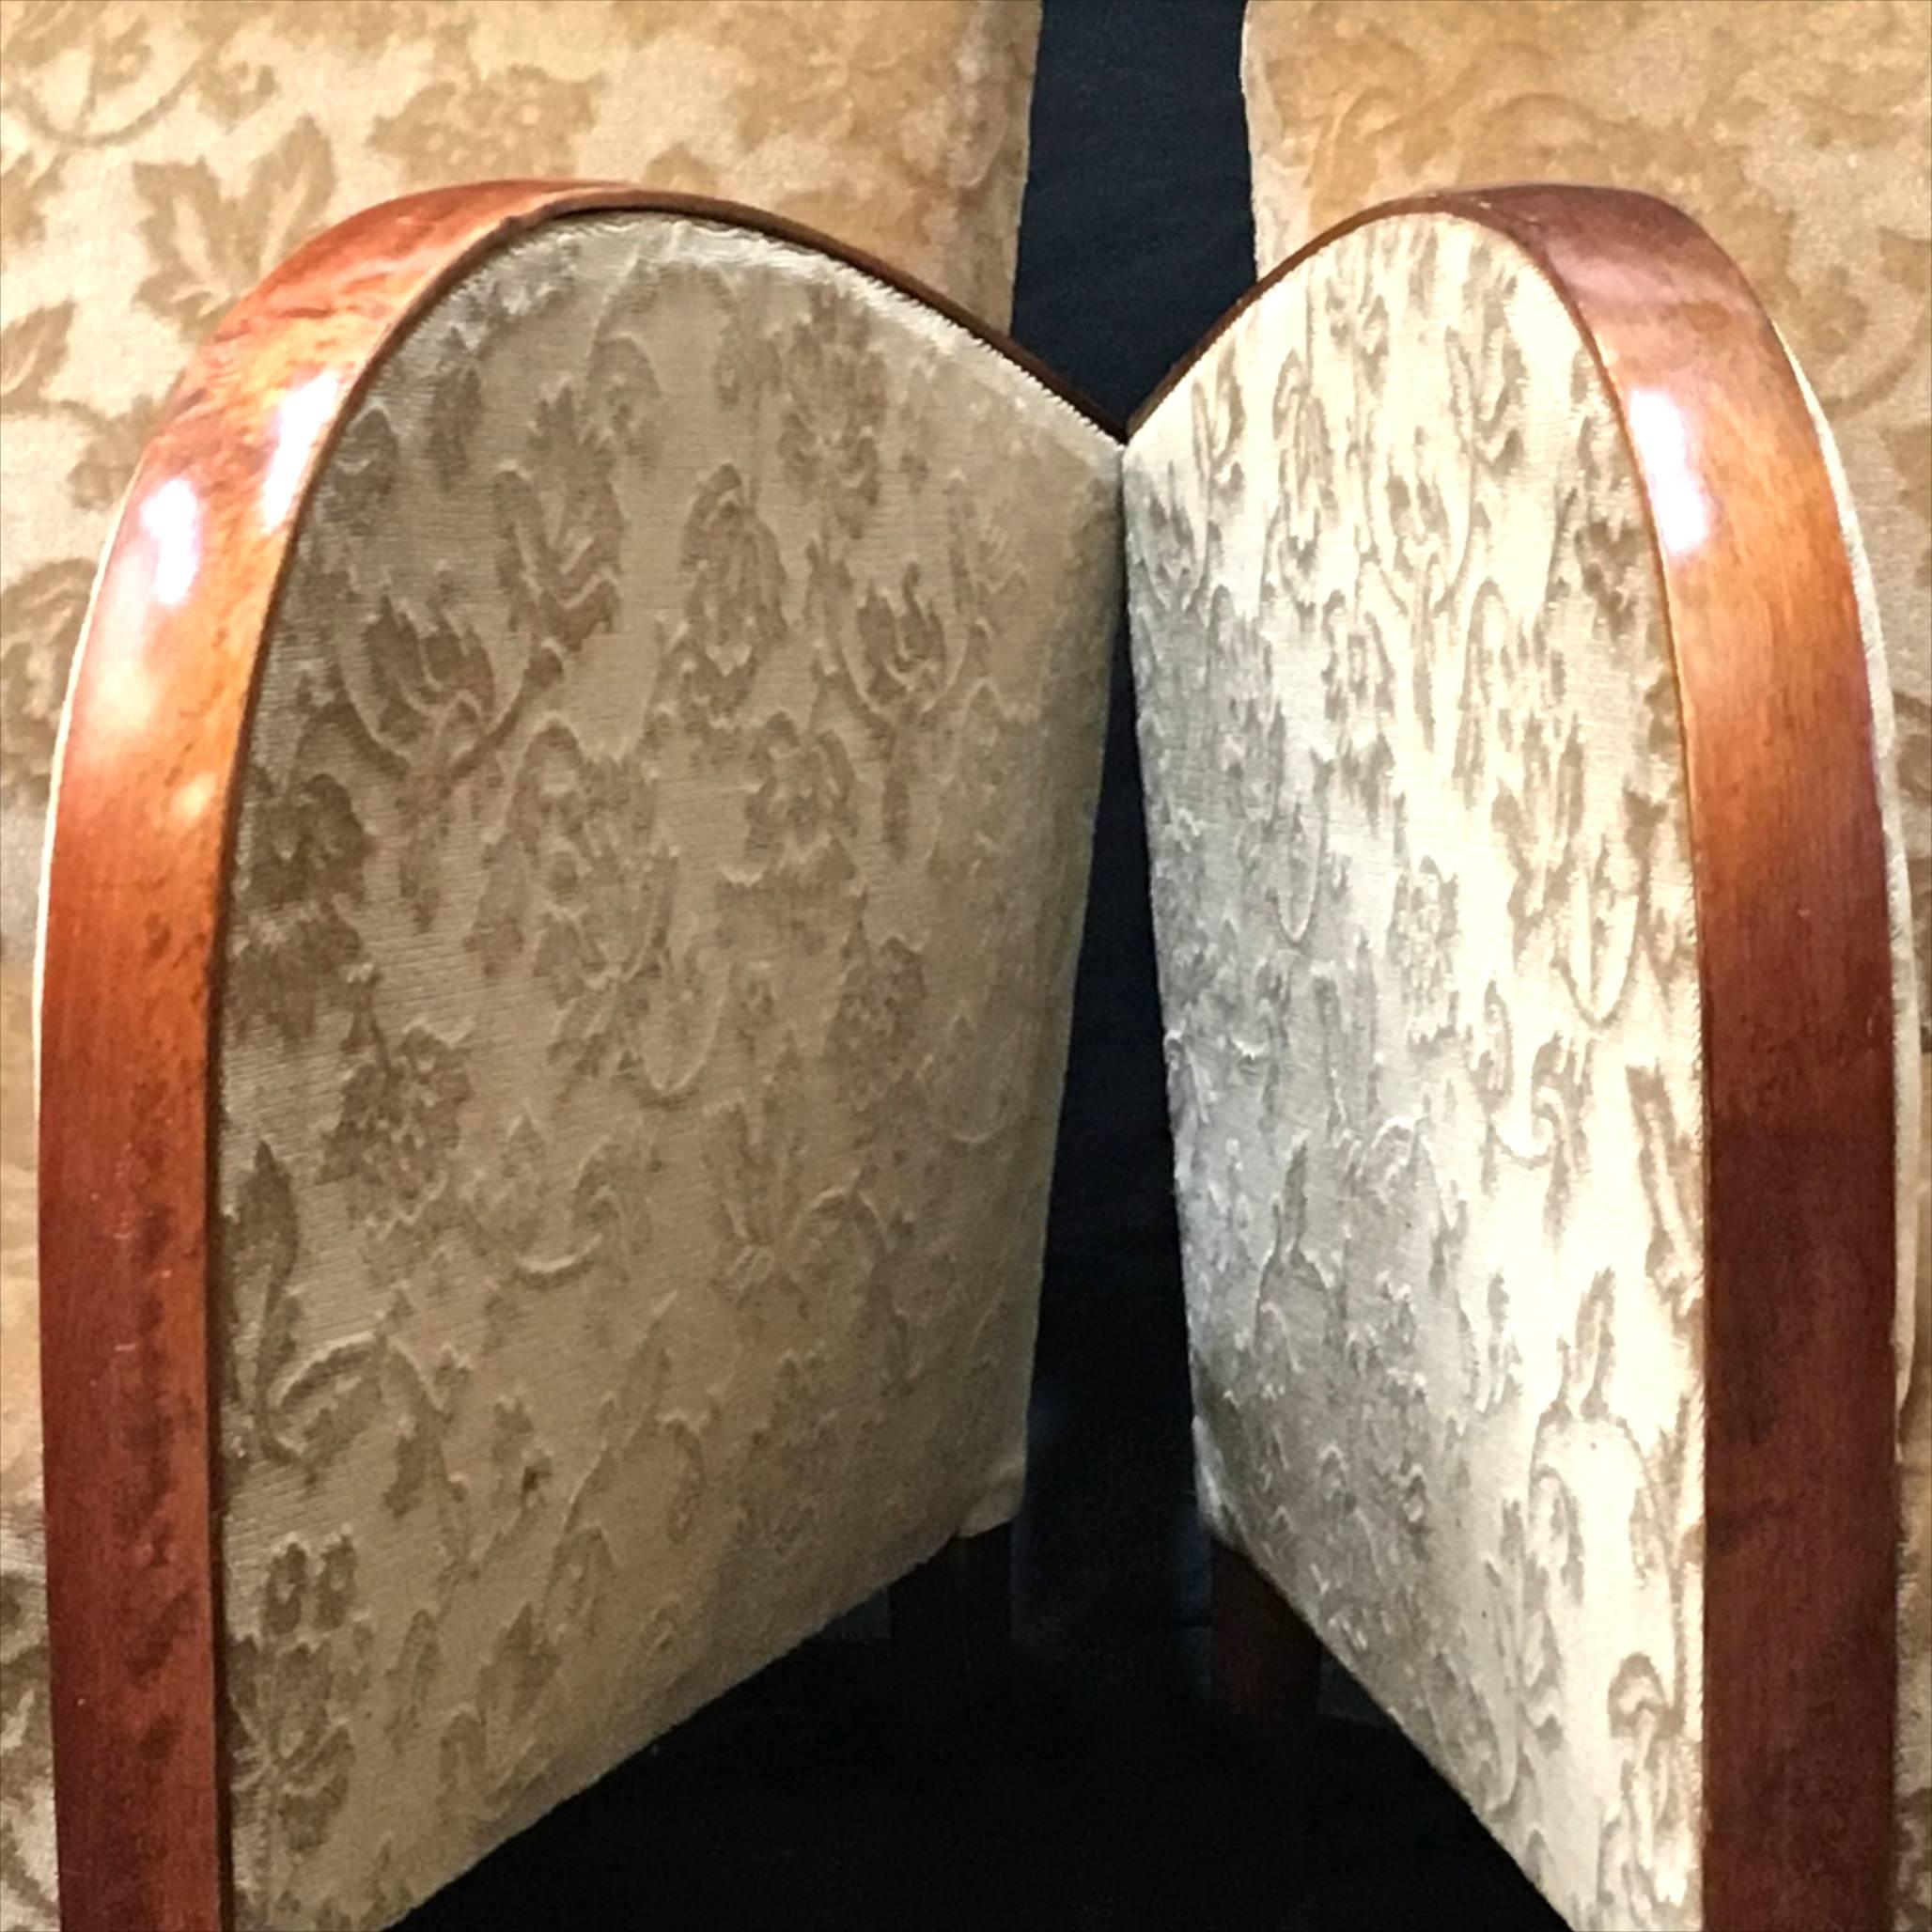 Swedish Art Deco armchairs from the art deco period with golden birch bentwood arms in a rich honey colour french polish finish. They are structurally sound.

The extra deep fully sprung seats on these armchairs make for a great sitting experience